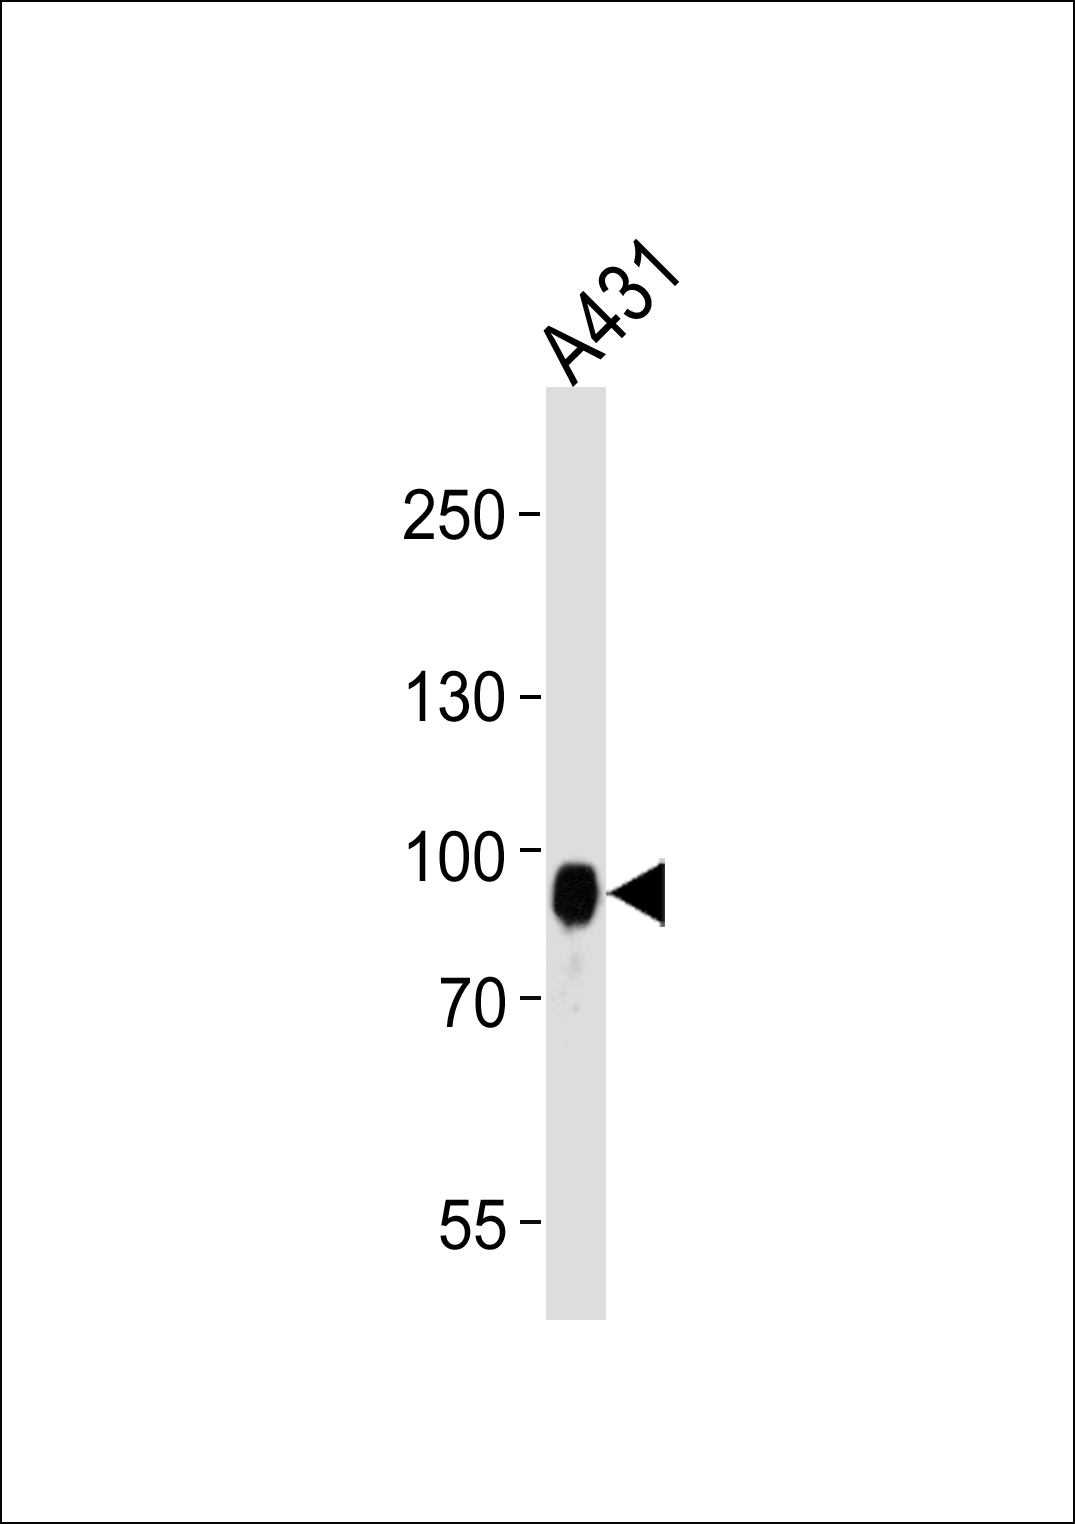 Western blot analysis of lysate from A431 cell line, using DSC3 Antibody (C-term)(Cat. #AP16771b). AP16771b was diluted at 1:1000 at each lane. A goat anti-rabbit IgG H&L(HRP) at 1:5000 dilution was used as the secondary antibody. Lysate at 35ug per lane. 